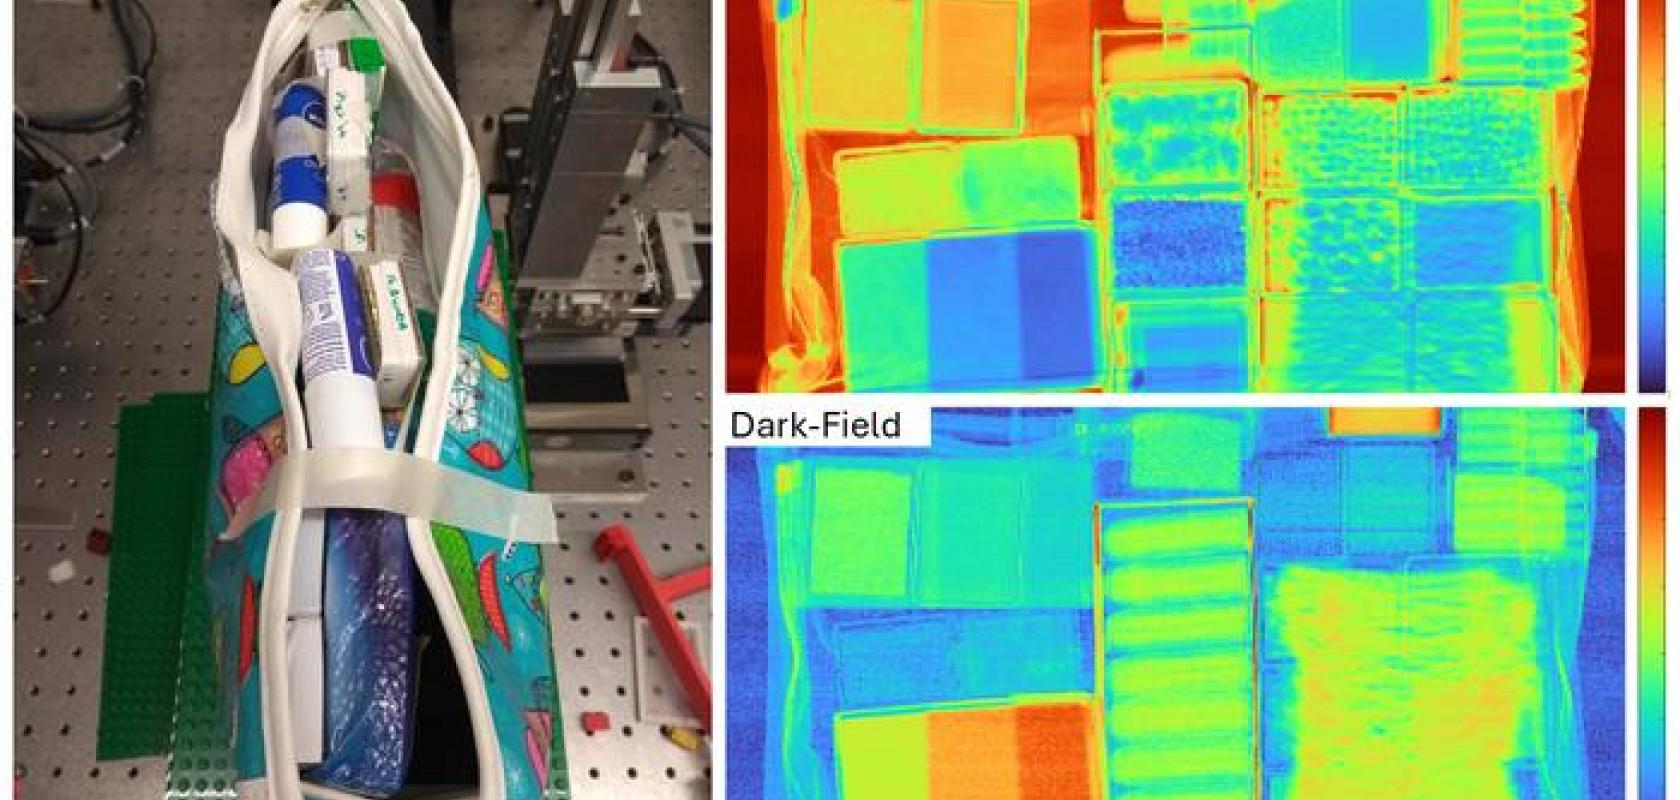 The new security scanning technique combines attenuation and dark-field x-ray imaging to create multi-contrast images, and detects threatening materials using machine learning